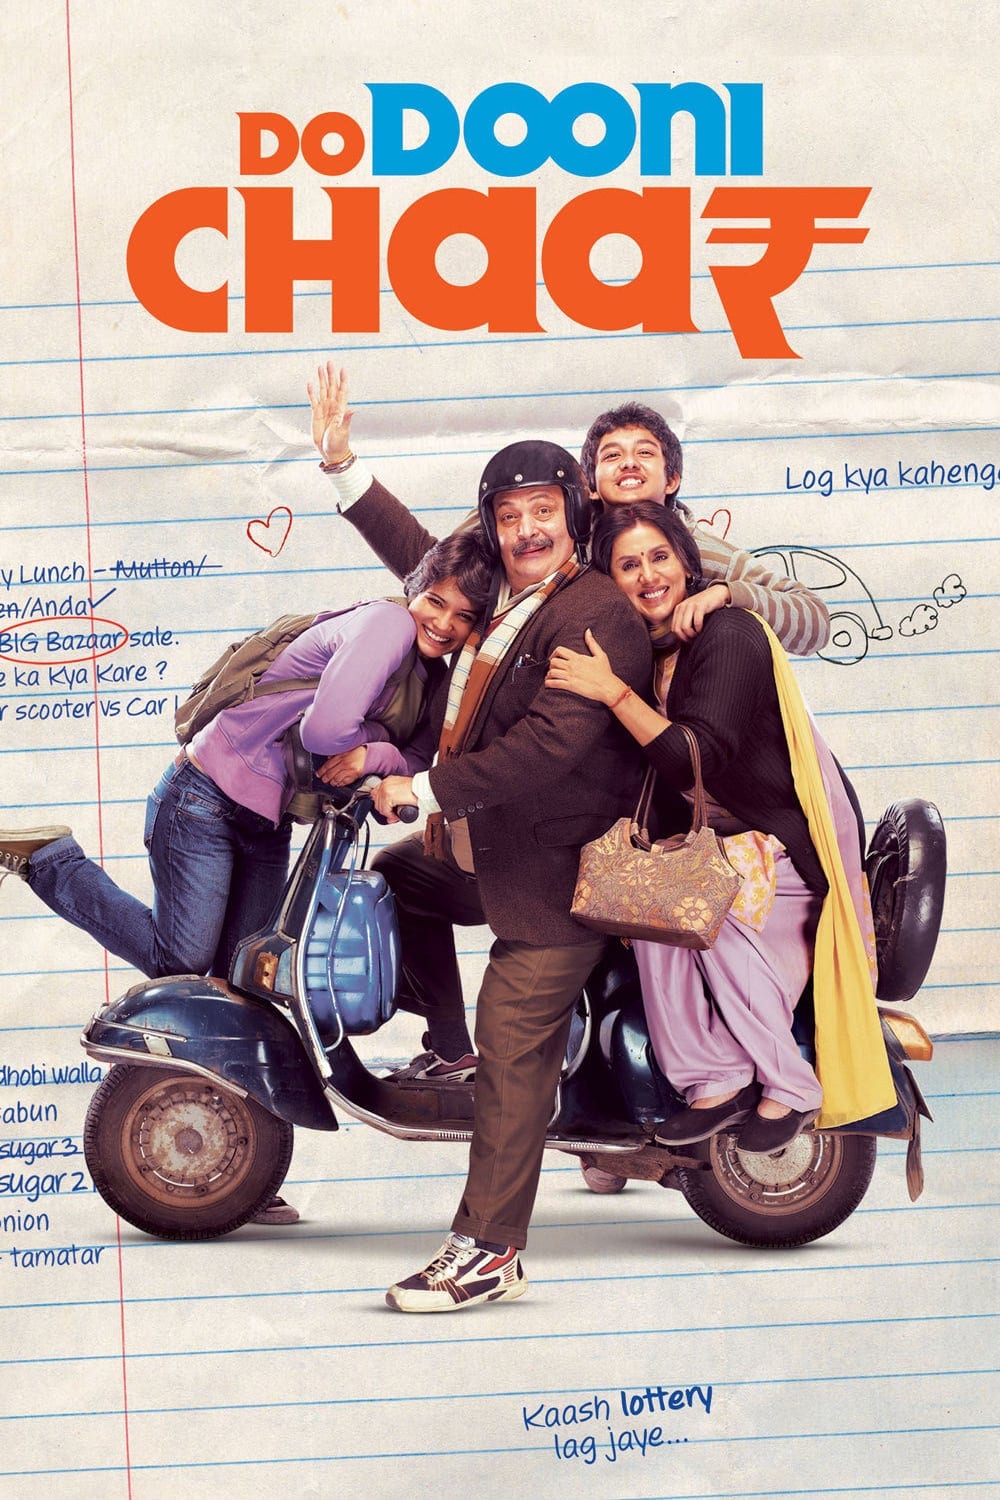 Poster for the movie "Do Dooni Chaar"